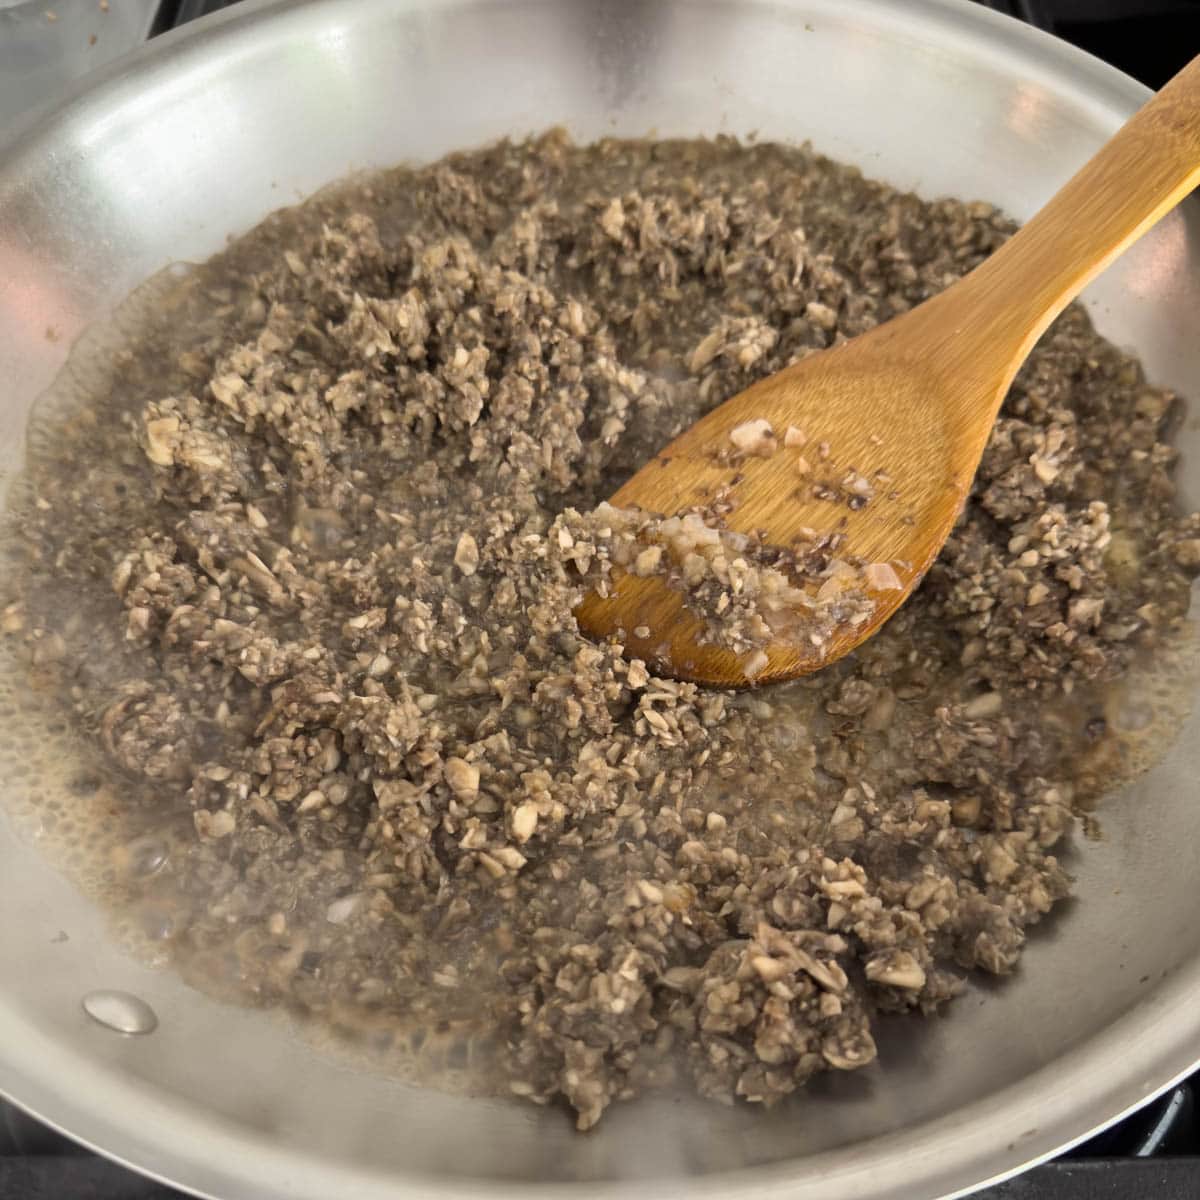 Chopping mushroom cooking for duxelles in a fry pan.